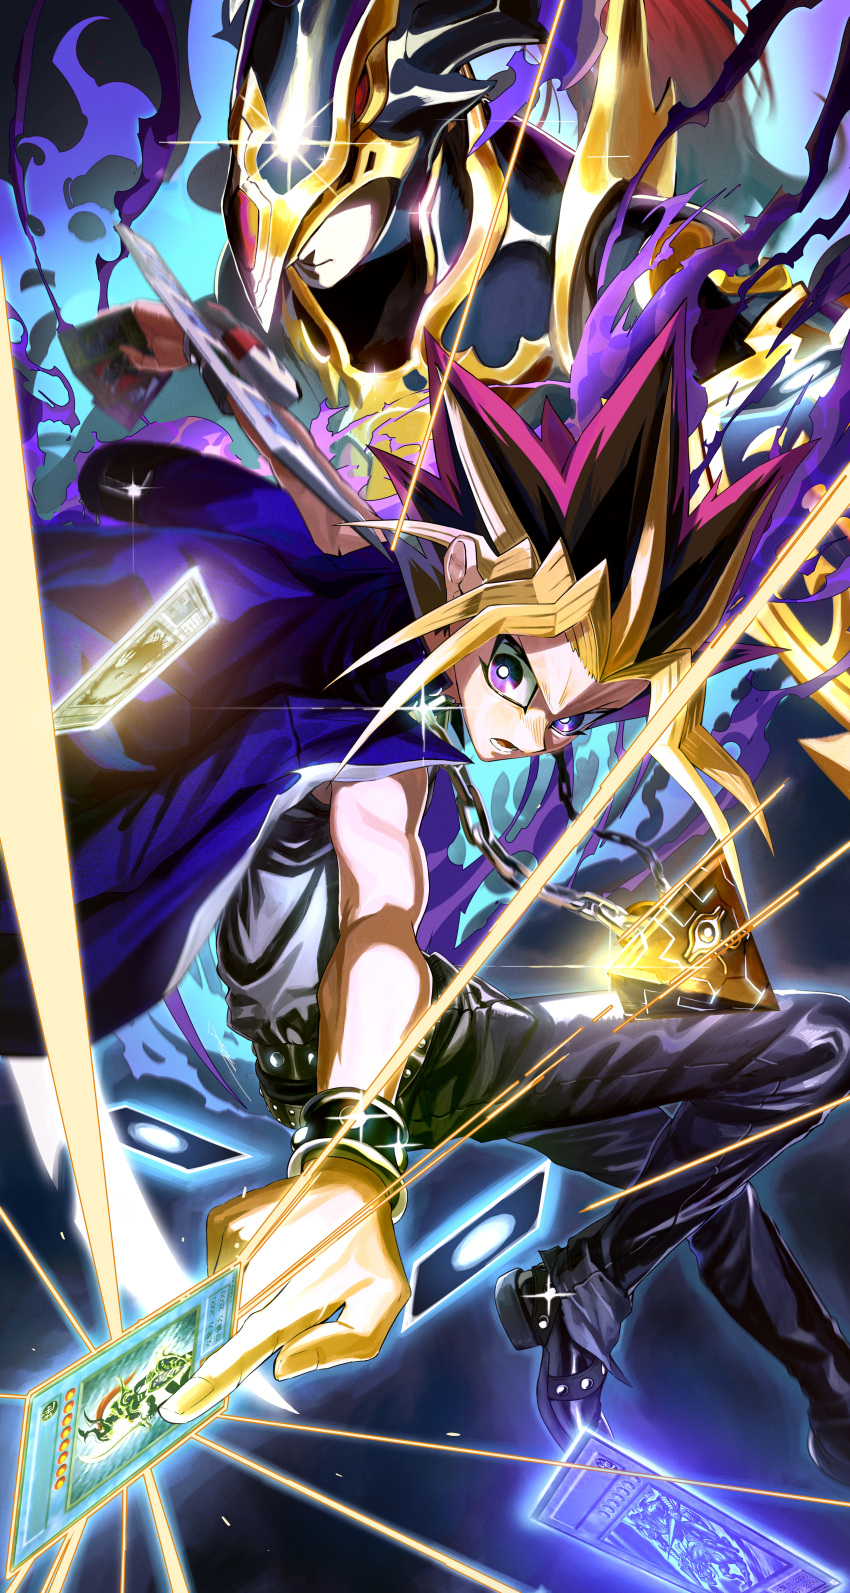 2boys absurdres black_hair black_luster_soldier black_pants blonde_hair chain collar duel_monster dyed_bangs gaia_the_fierce_knight highres holding jacket jewelry jumping kuriboh millennium_puzzle monster multicolored_hair multiple_boys mutou_yuugi ossan_zabi_190 pants shirt solo spiky_hair violet_eyes yu-gi-oh! yu-gi-oh!_duel_monsters